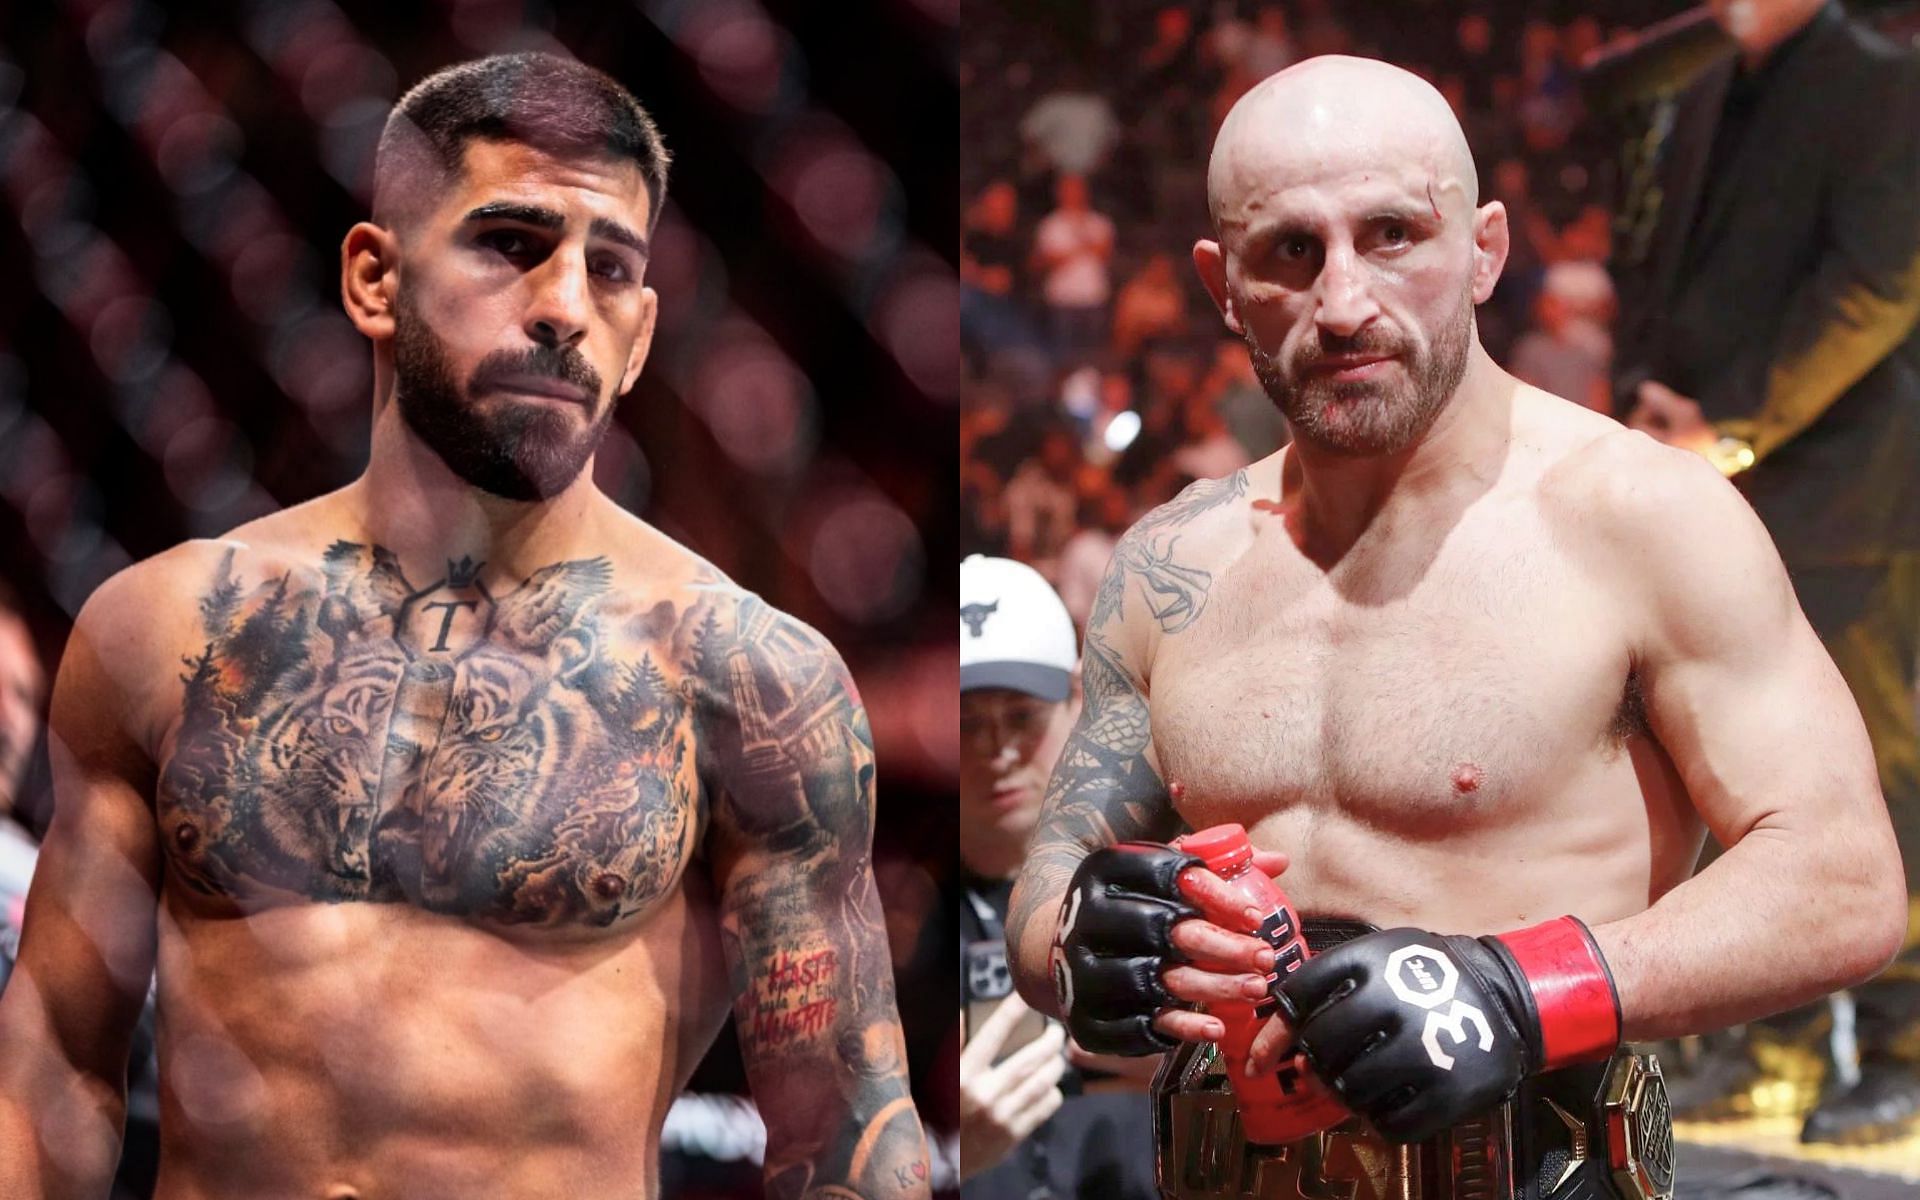 Former UFC champ dismisses theory that Alexander Volkanovski (right) is facing Ilia Topuria (left) too soon after his KO loss [Images Courtesy: @GettyImages and @iliatopuria on Instagram]